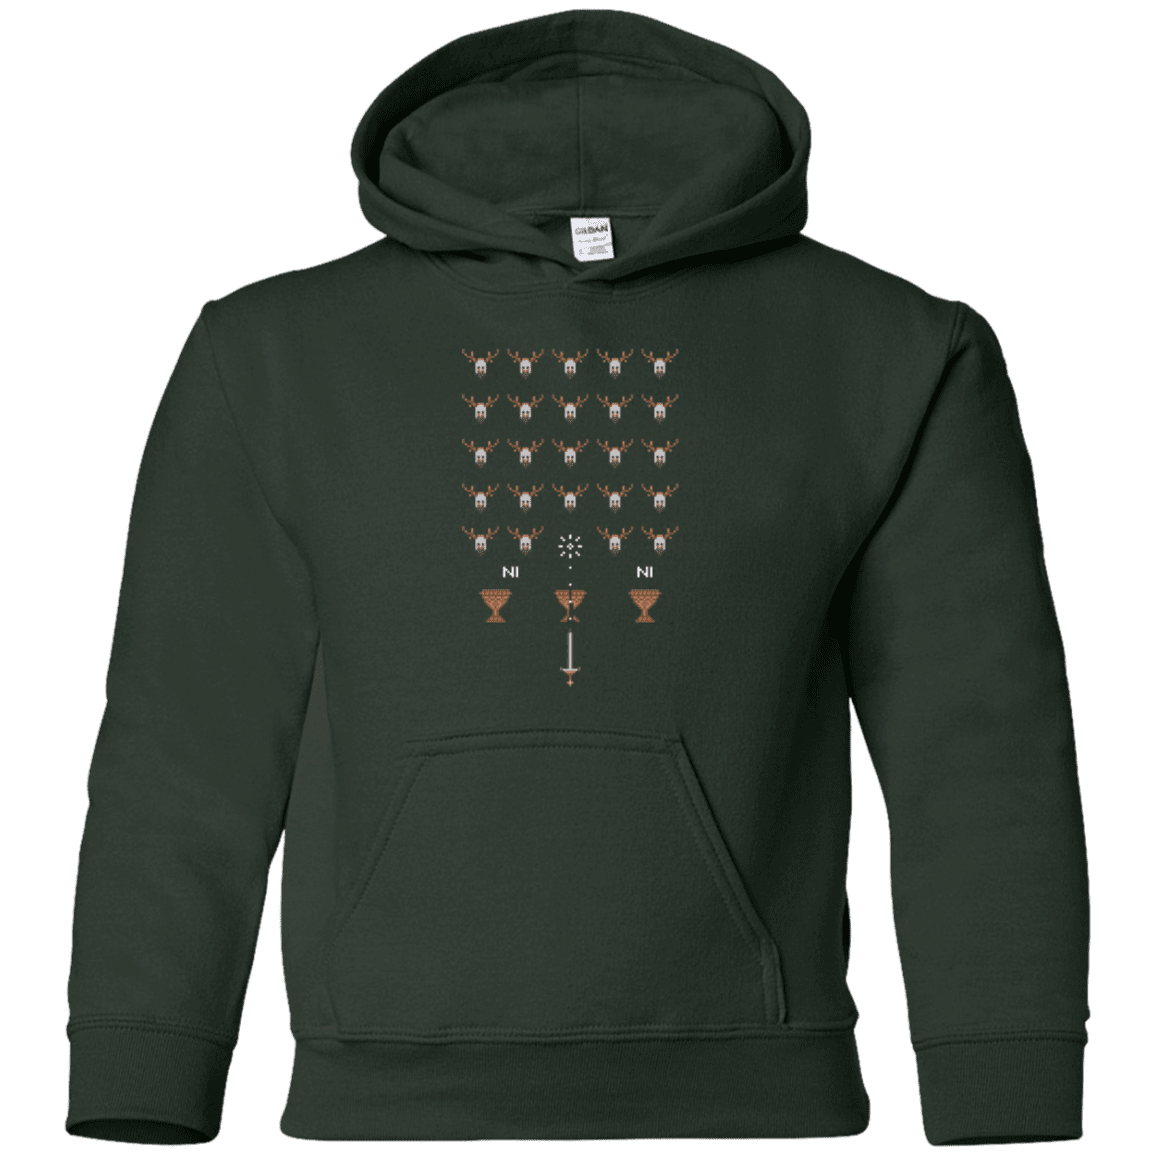 Sweatshirts Forest Green / YS Space NI Invaders Youth Hoodie